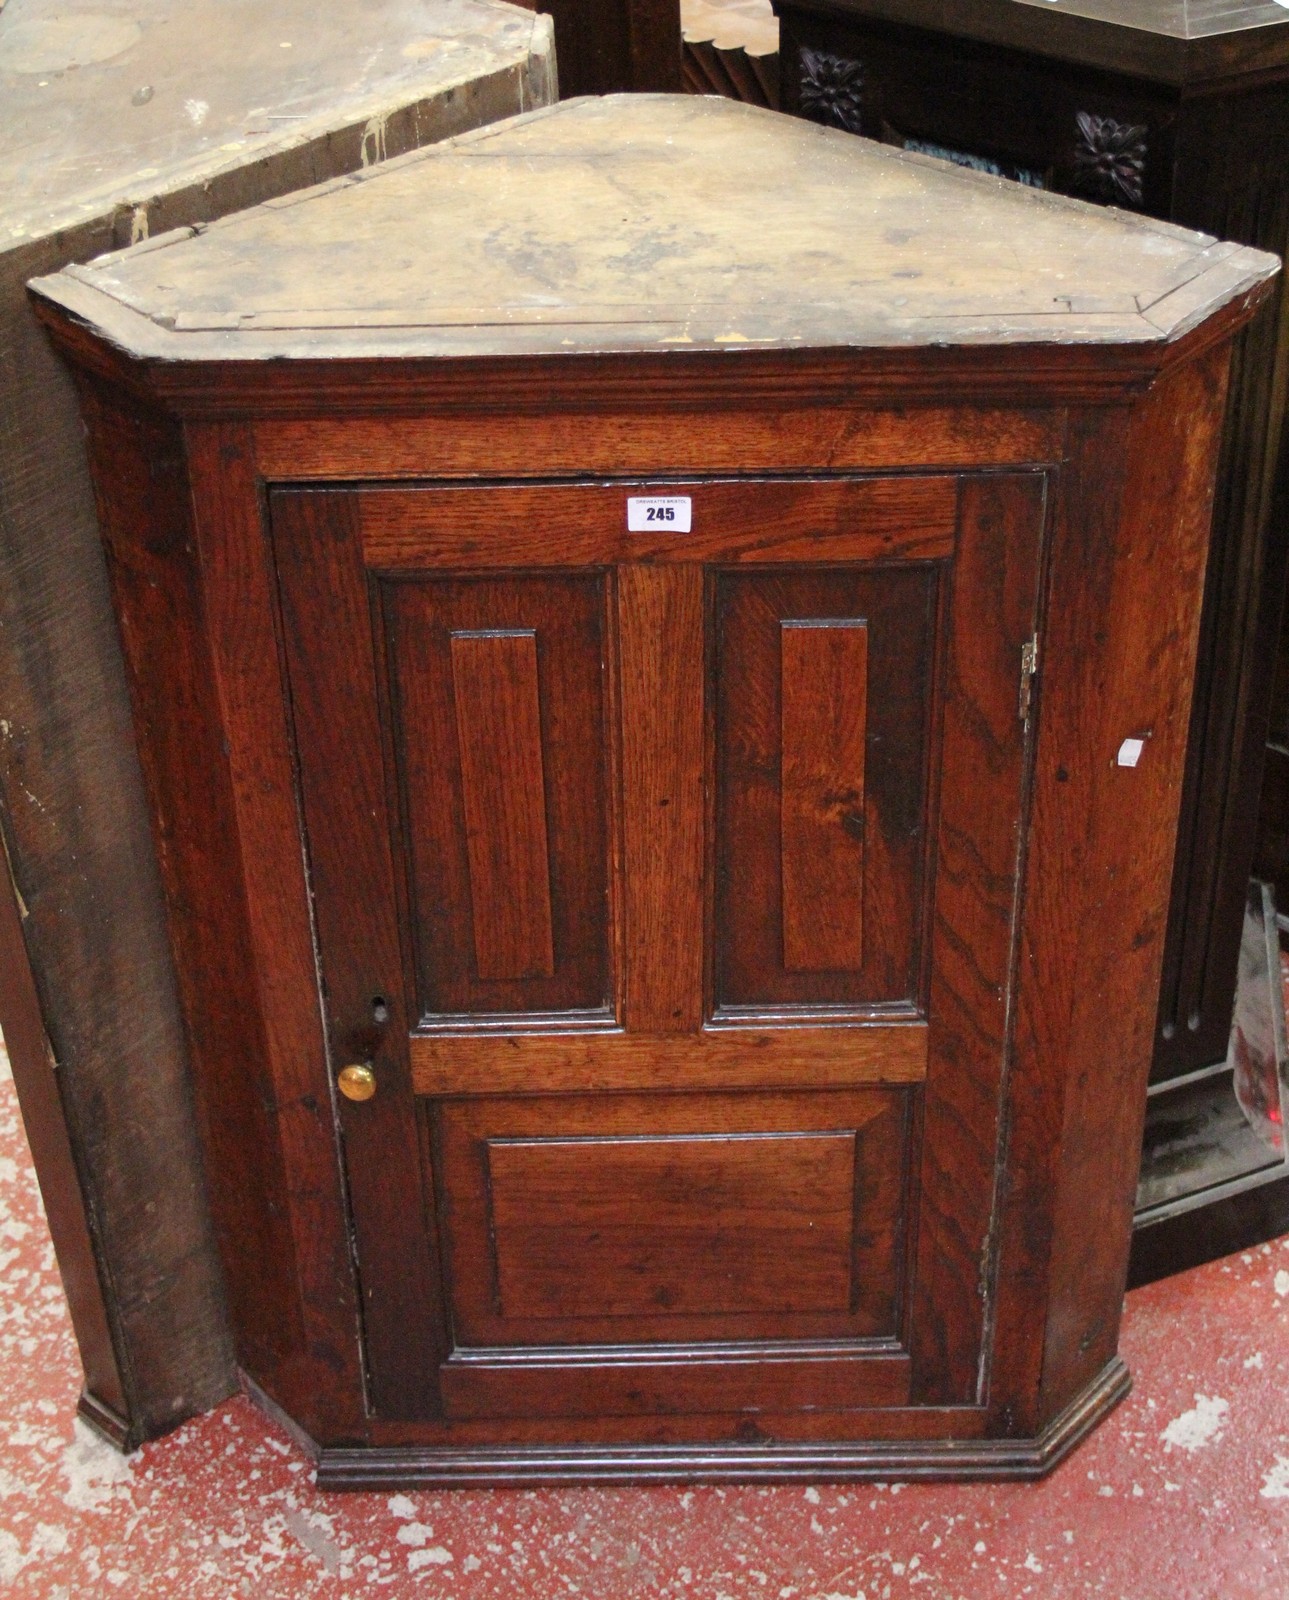 A George III oak hanging corner cupboard with glazed doors and another with panelled doors.